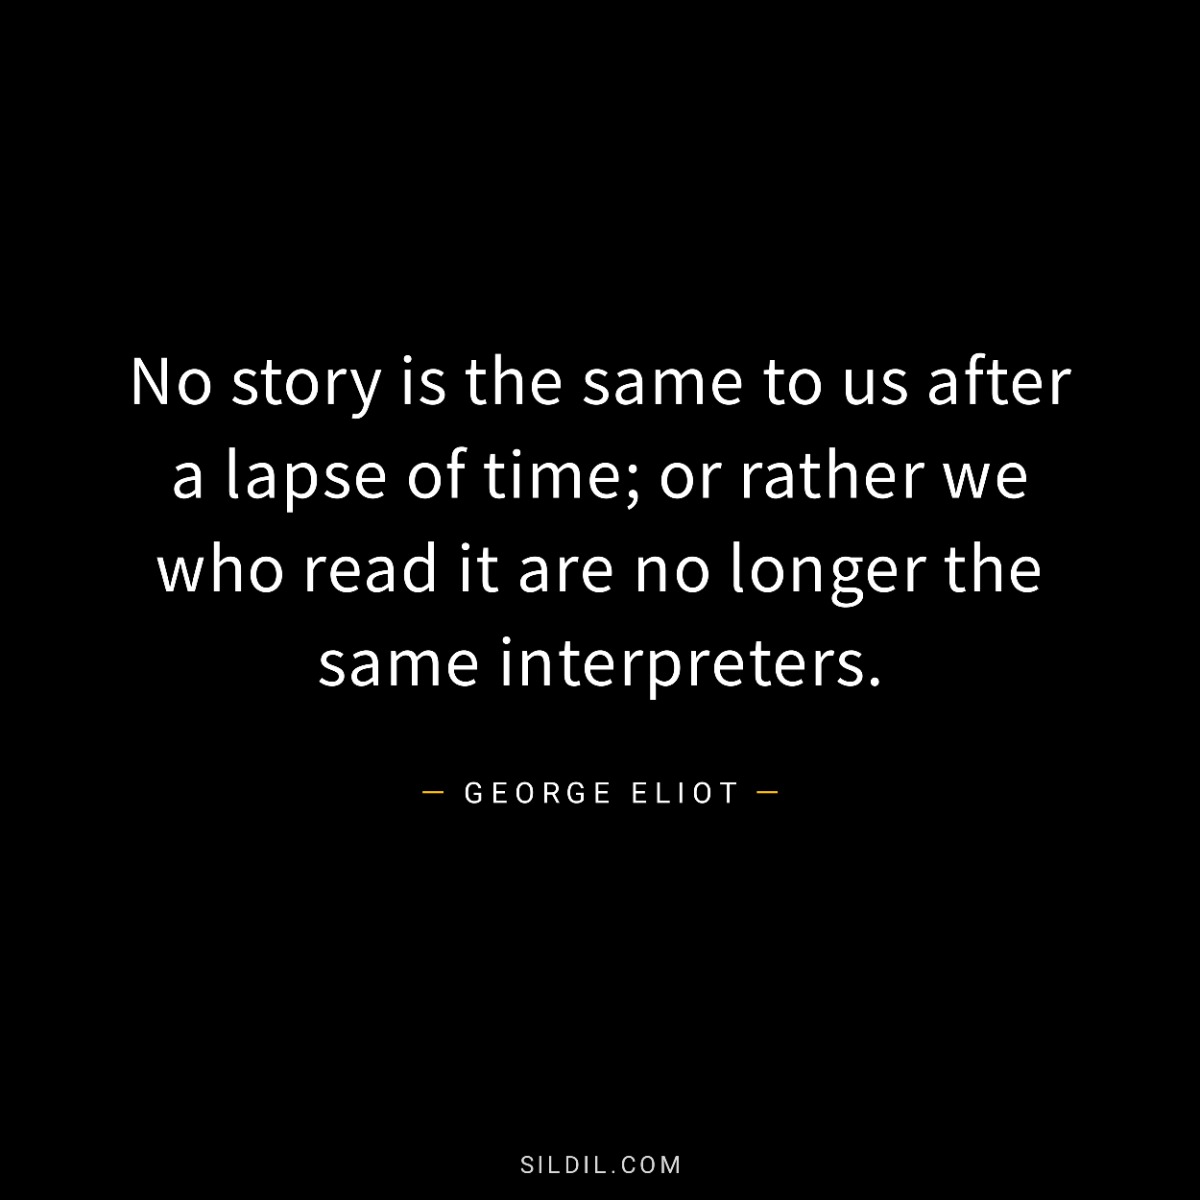 No story is the same to us after a lapse of time; or rather we who read it are no longer the same interpreters.